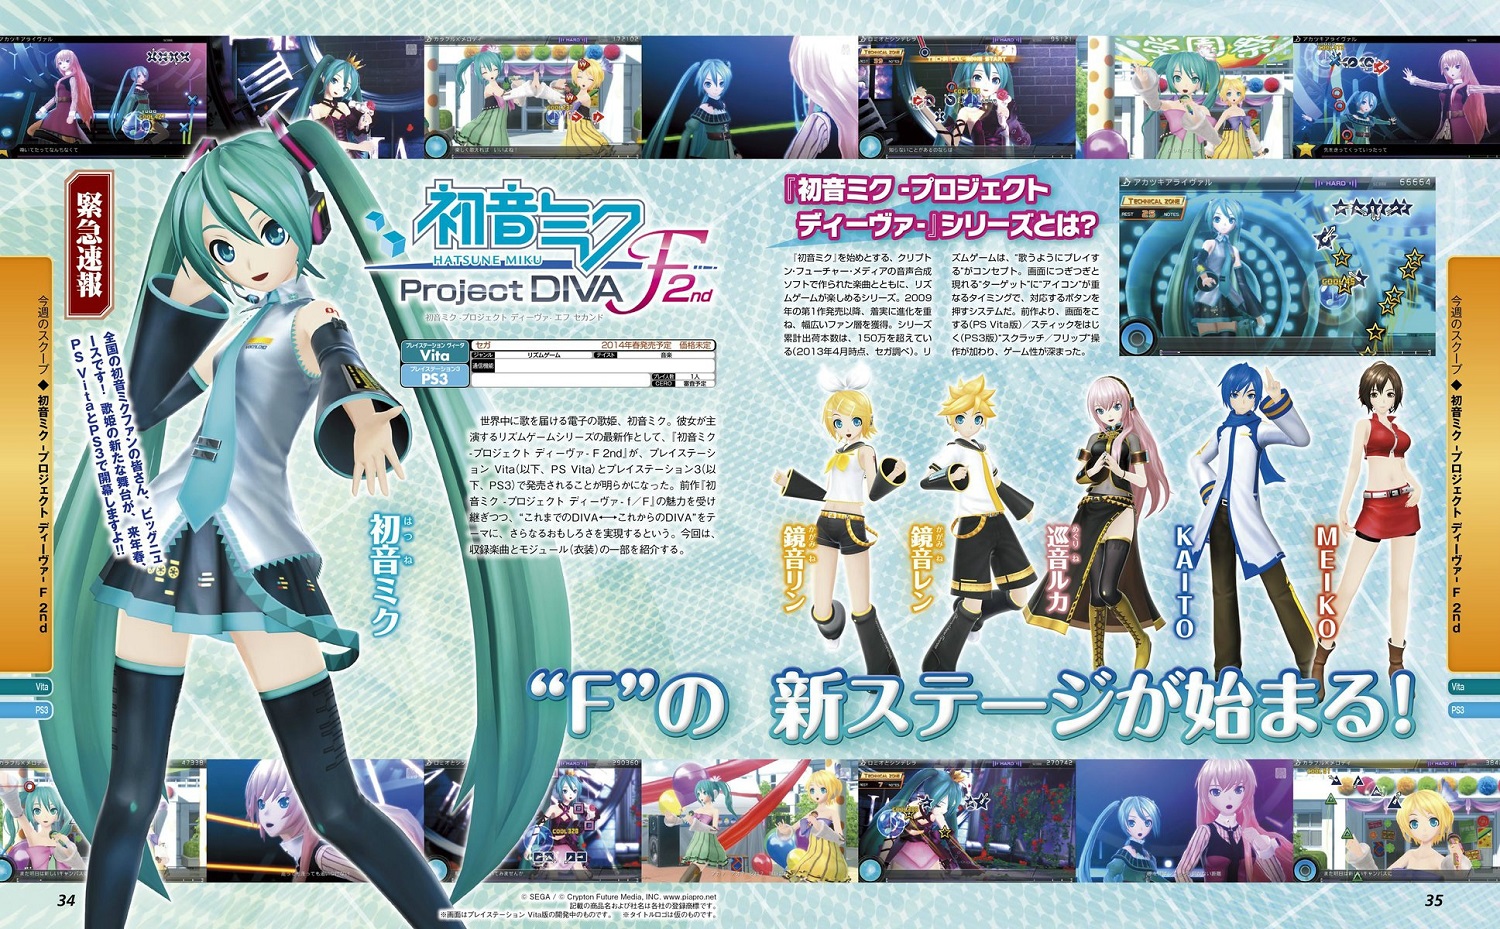 Hatsune Miku Project Diva F 2nd Announced For Ps3 And Psvita Capsule Computers